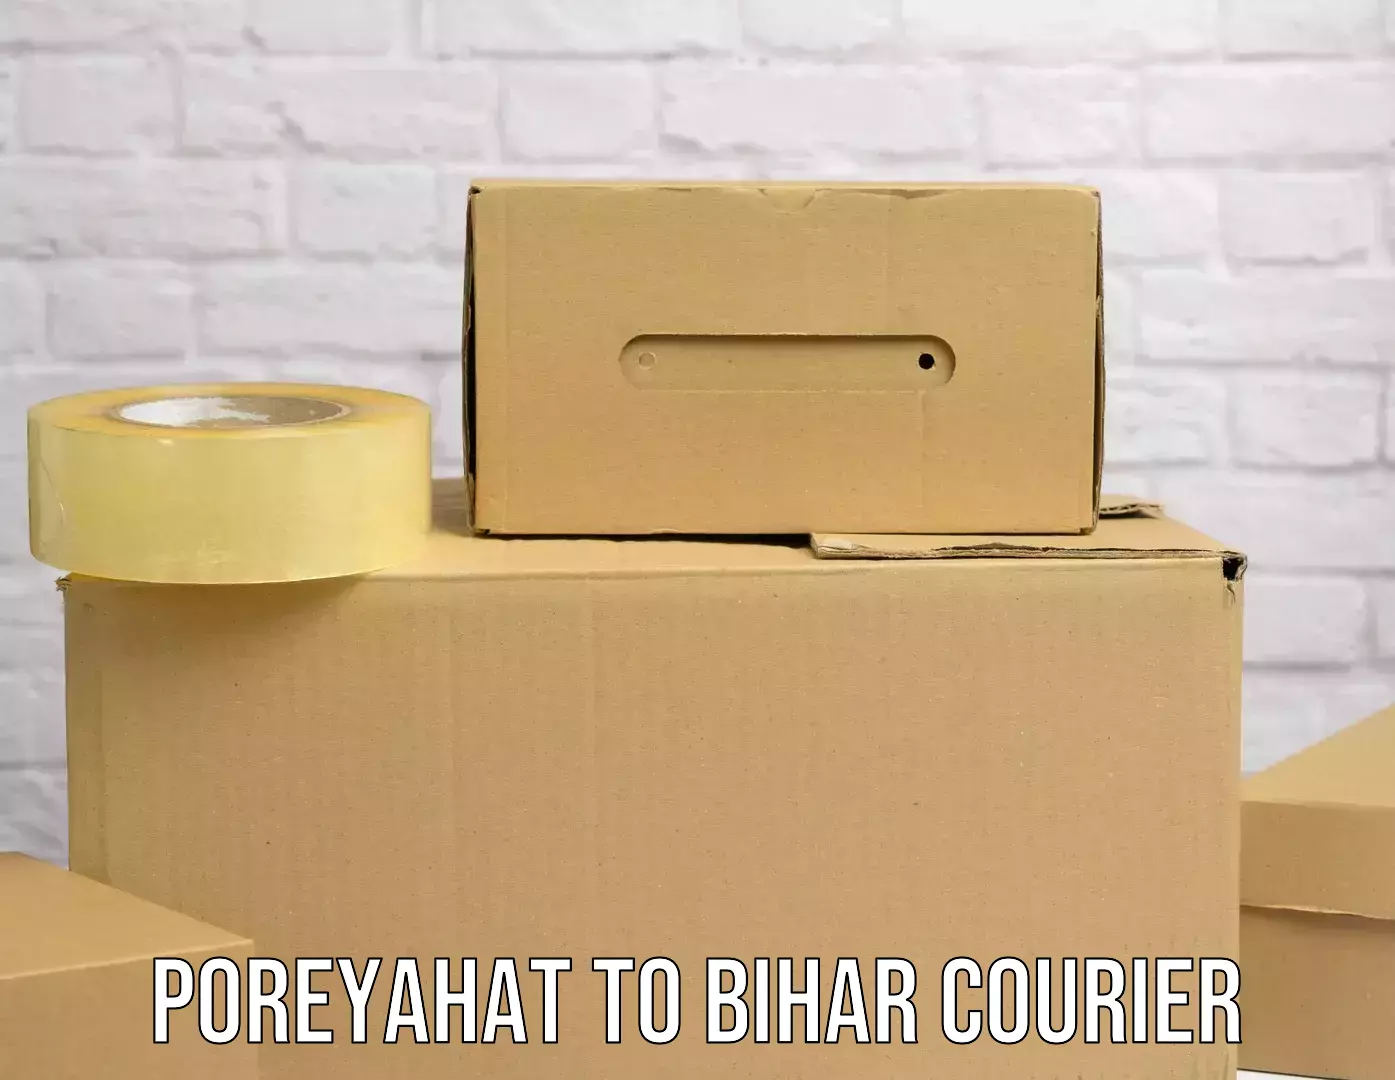 Subscription-based courier Poreyahat to Bihar